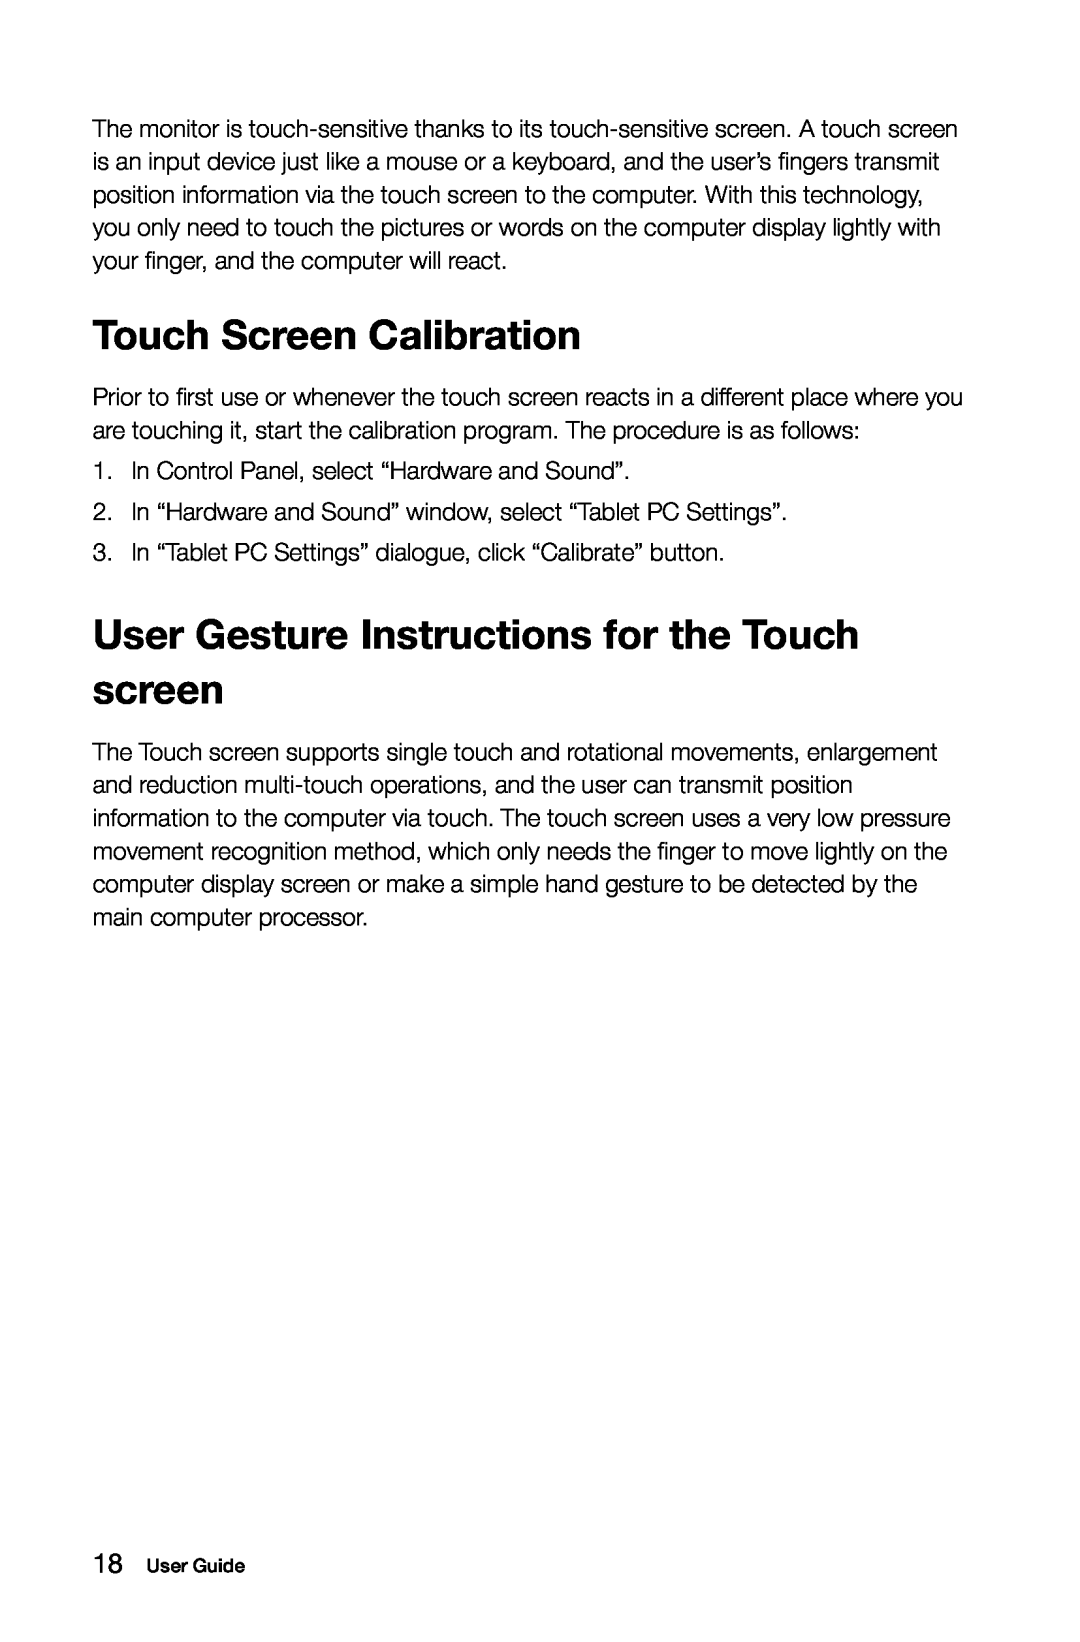 Lenovo A7 manual Touch Screen Calibration, User Gesture Instructions for the Touch screen 